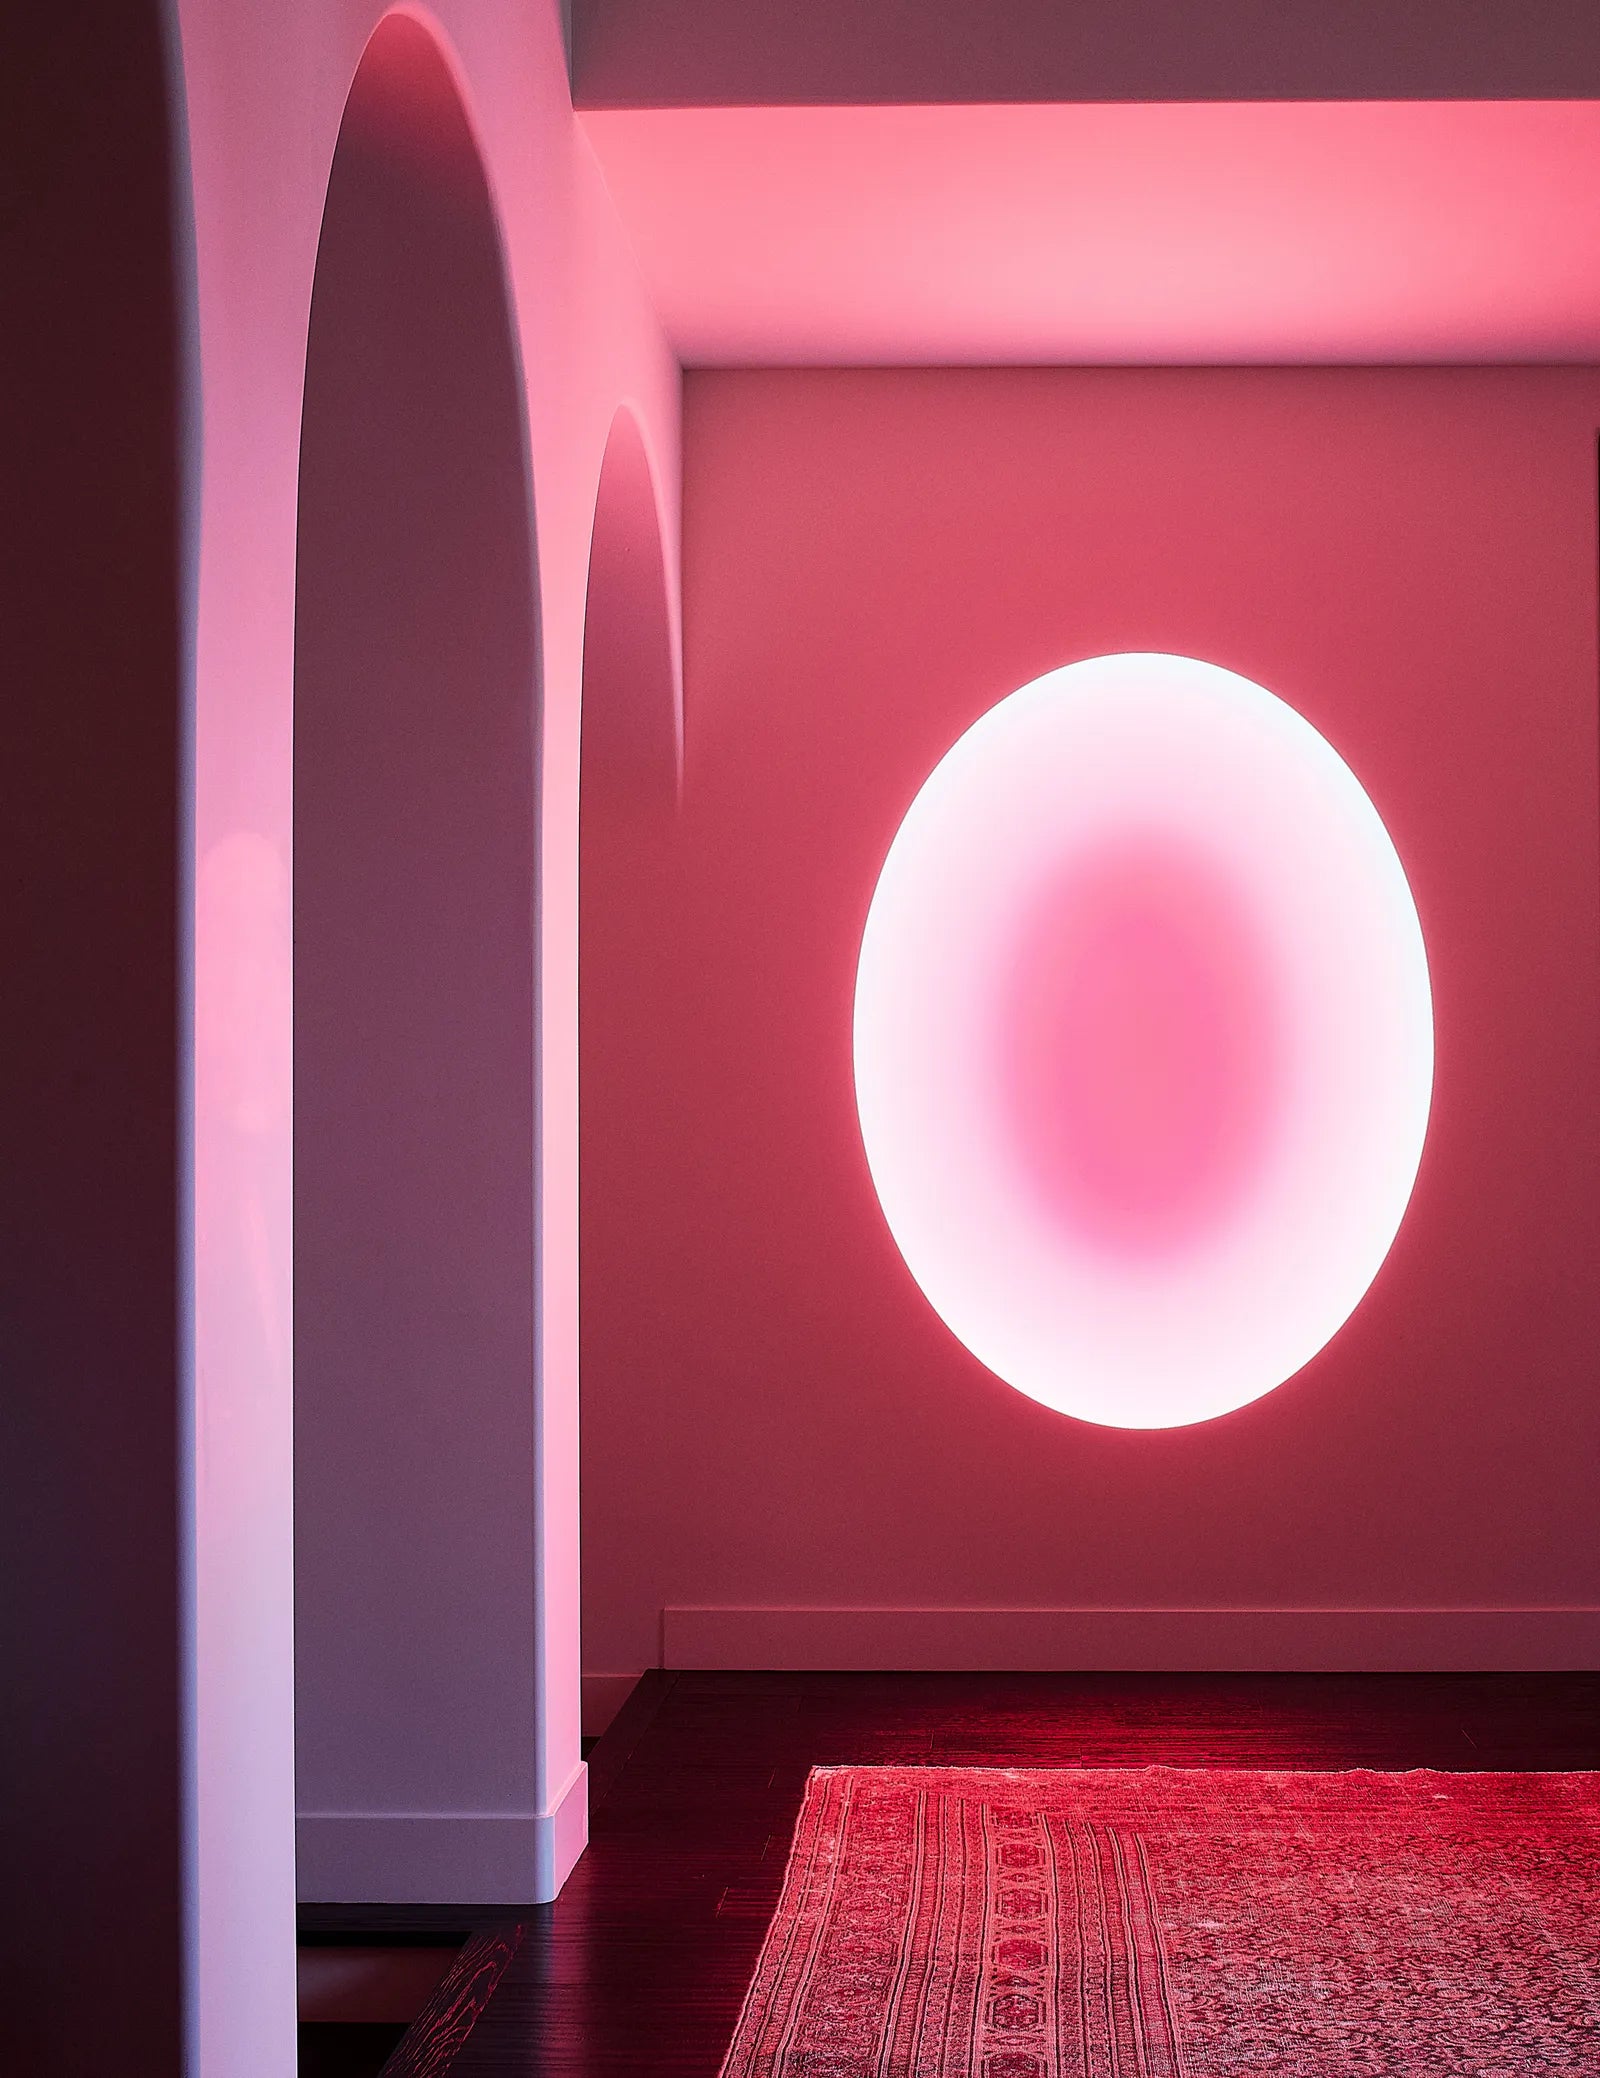 James Turrell art installation, light sculpture, light and space movement artist, Kendall Jenner home tour on Kevin Francis Design